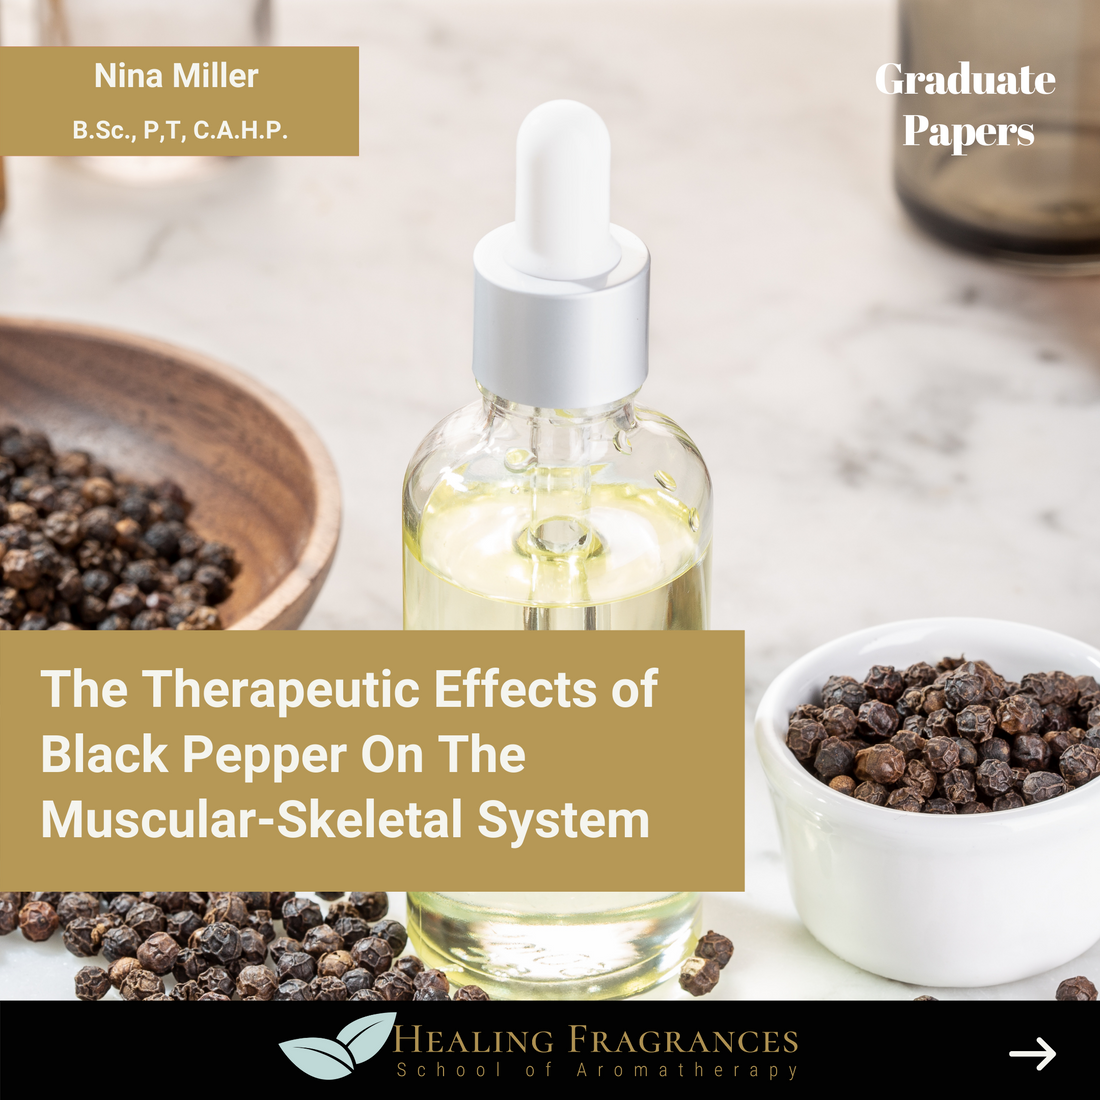 The Therapeutic Effects of Black Pepper Essential Oil on the Muscular/Skeletal System